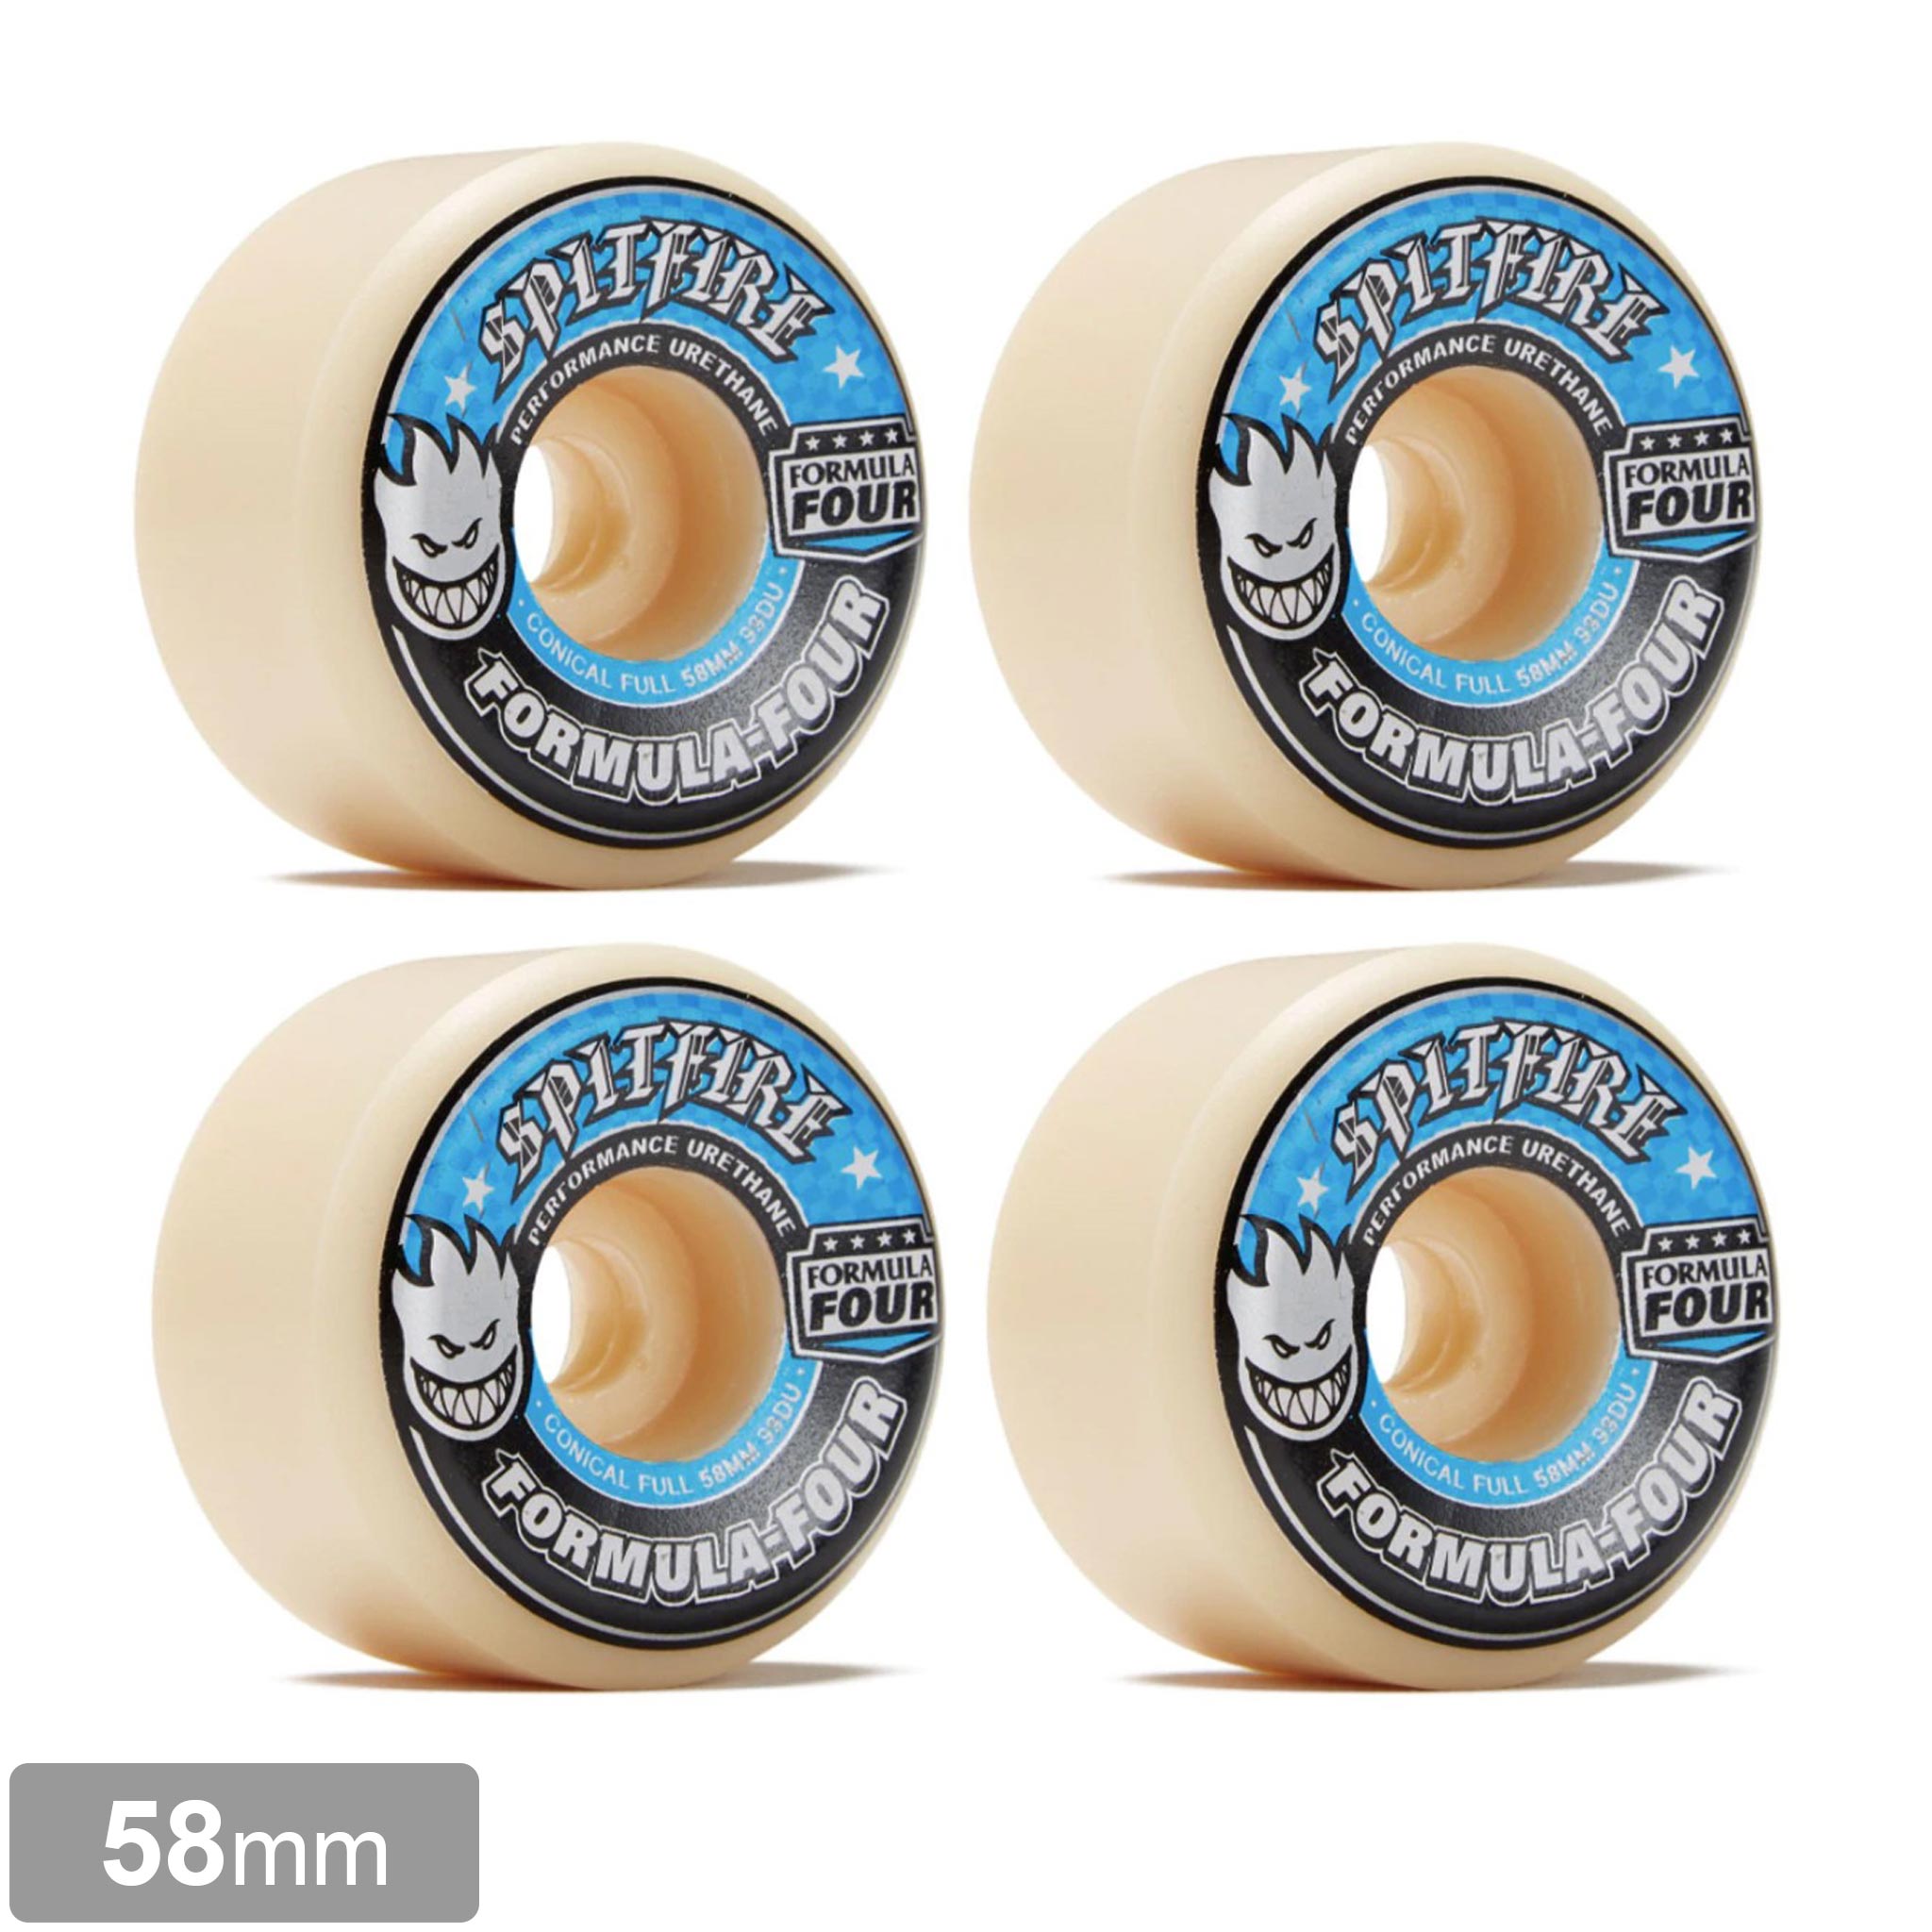 SPITFIRE FORMULA FOUR CONICAL FULL 99A 58mm 【 スピットファイヤー 